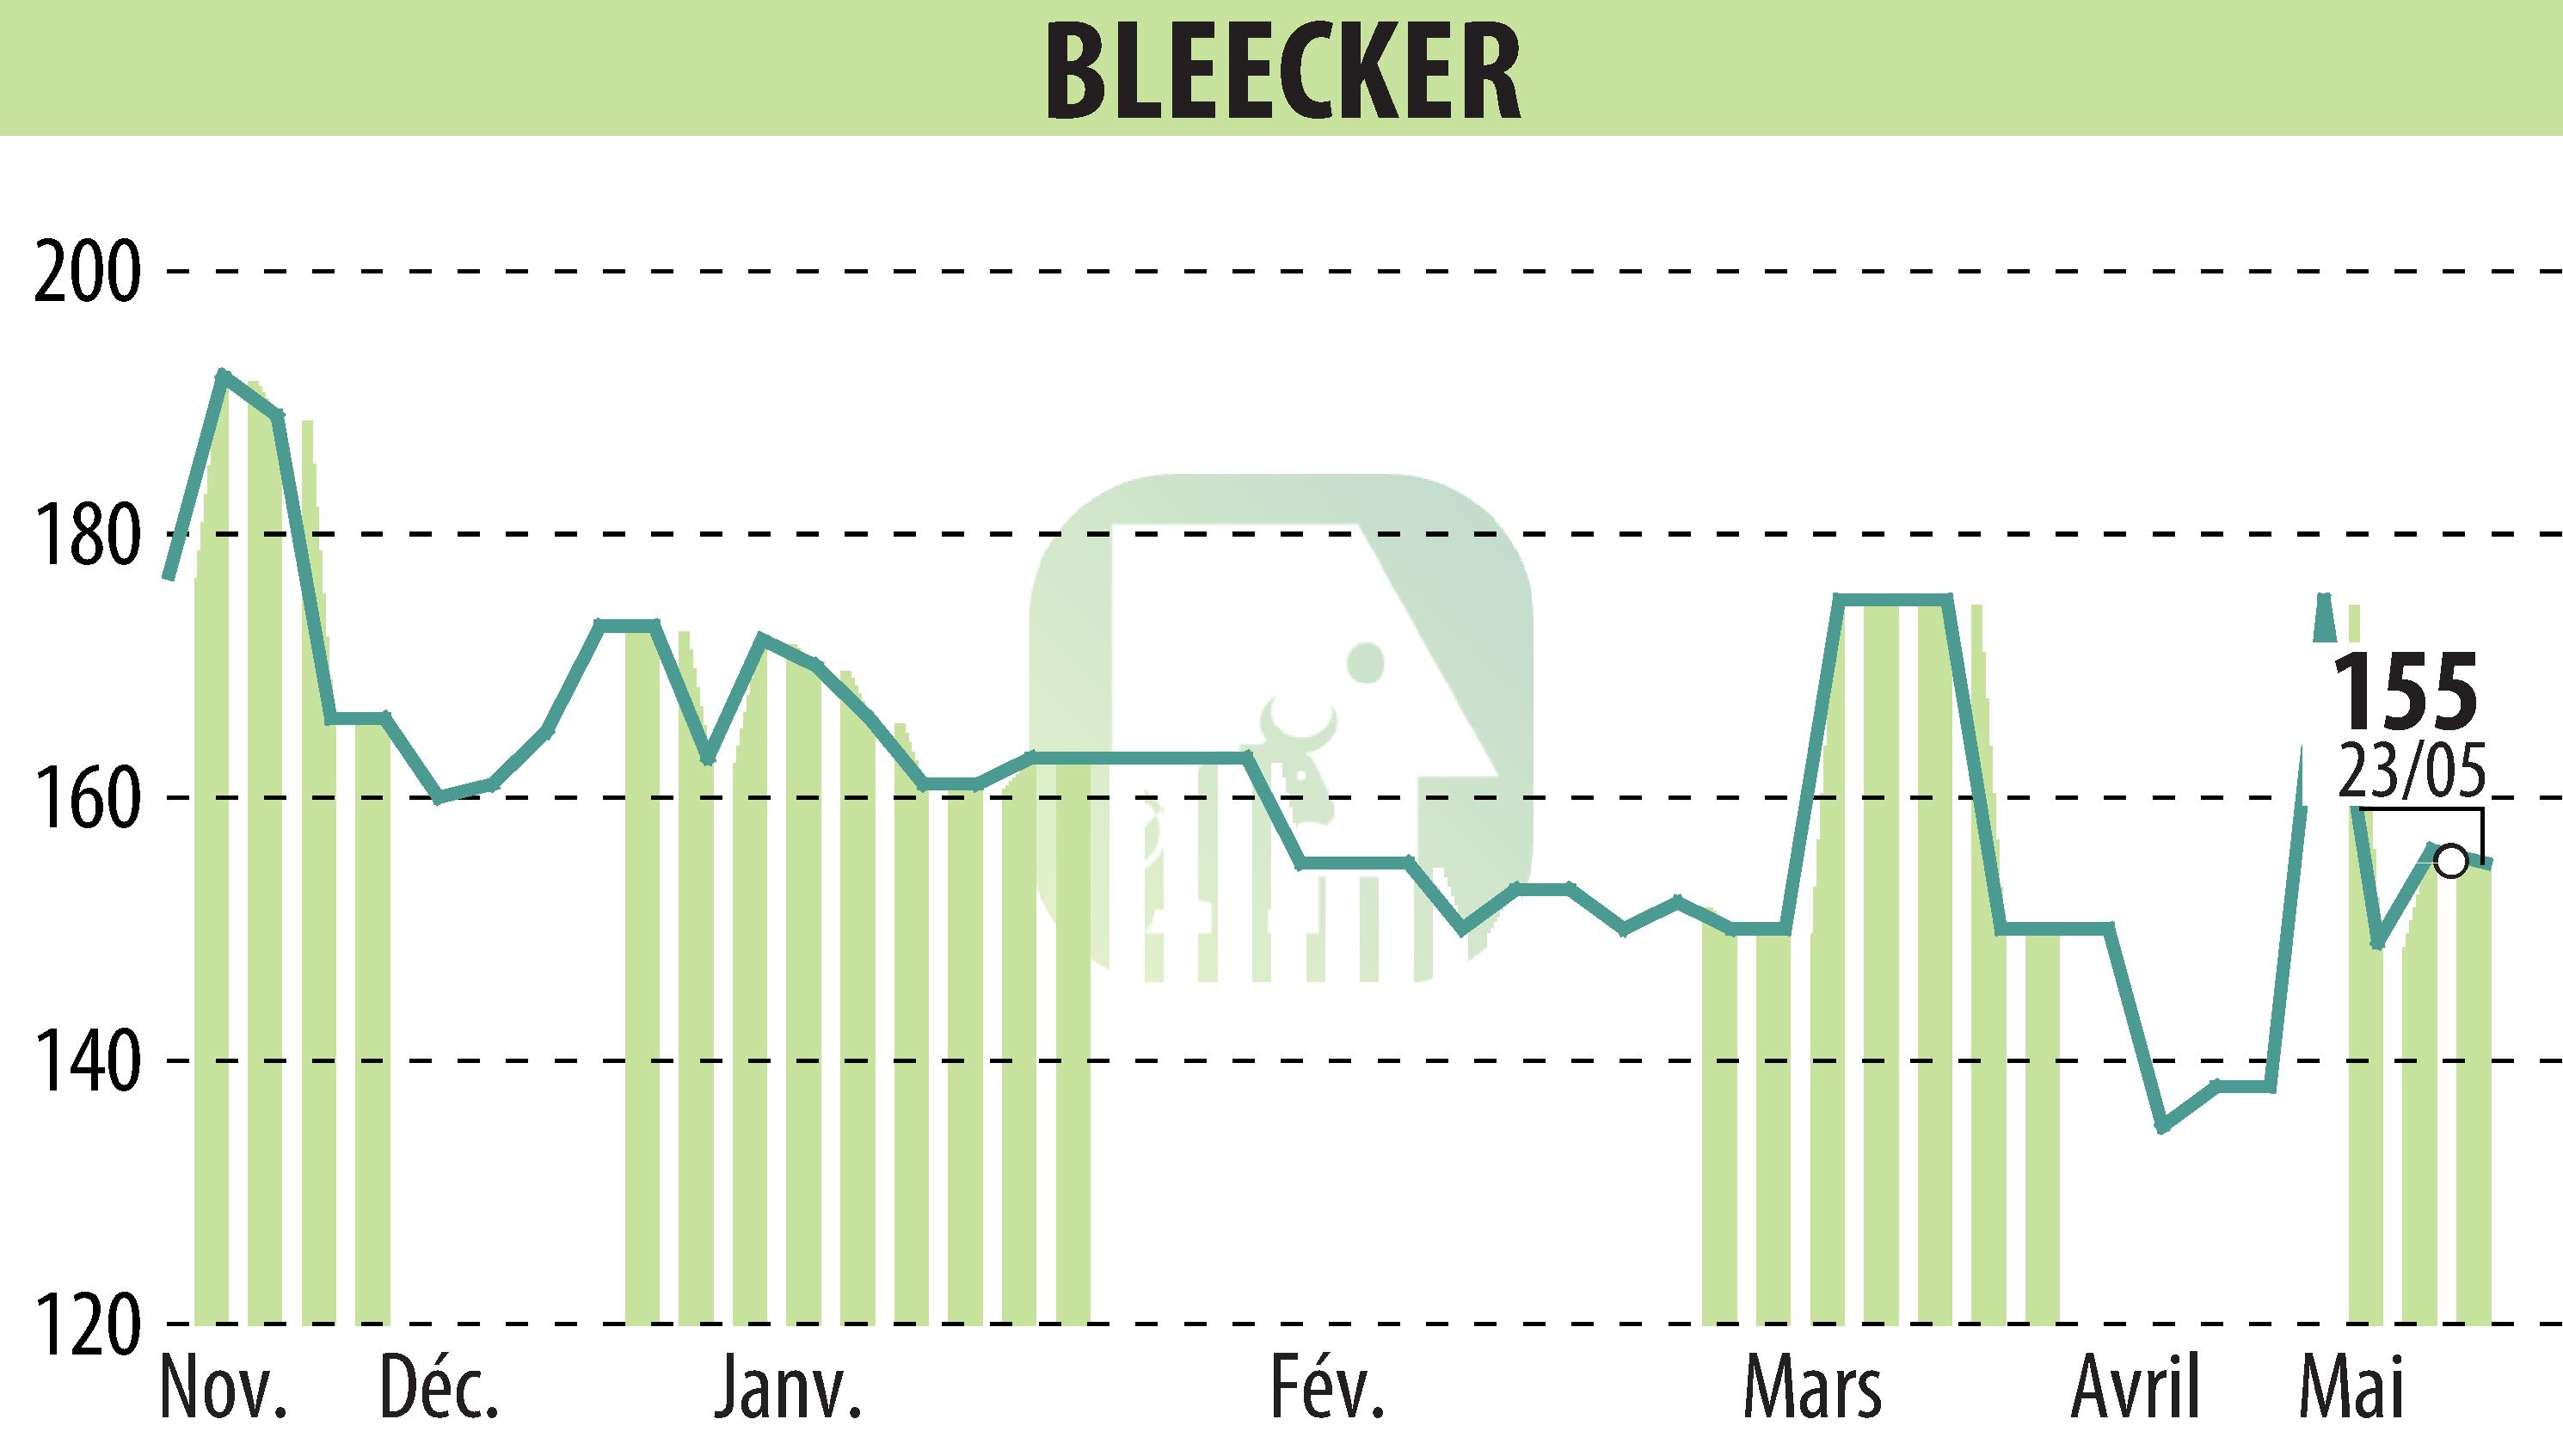 Stock price chart of BLEECKER (EPA:BLEE) showing fluctuations.